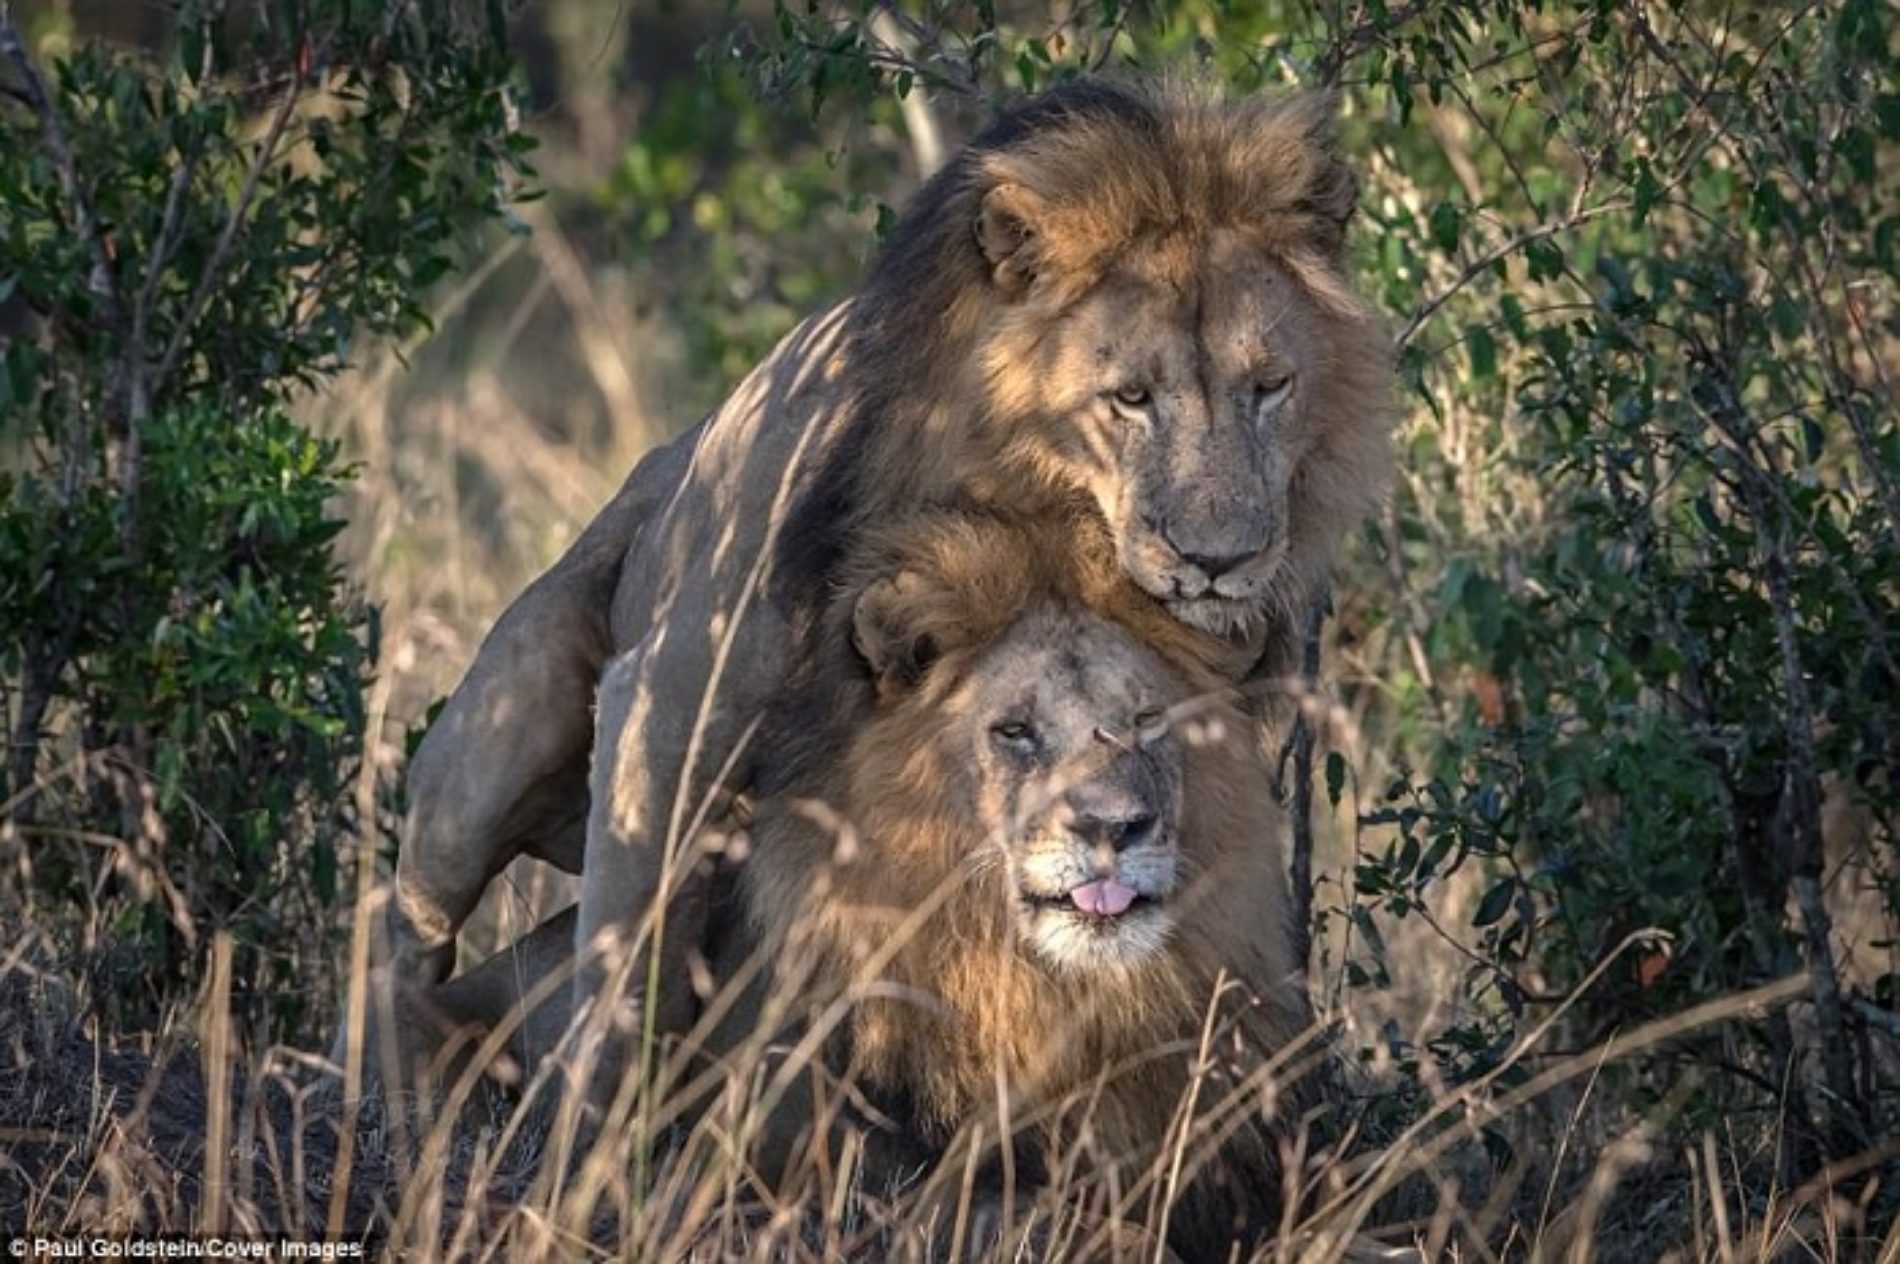 He’s my mane man: Two lions spotted putting on rare public display of affection in Kenya